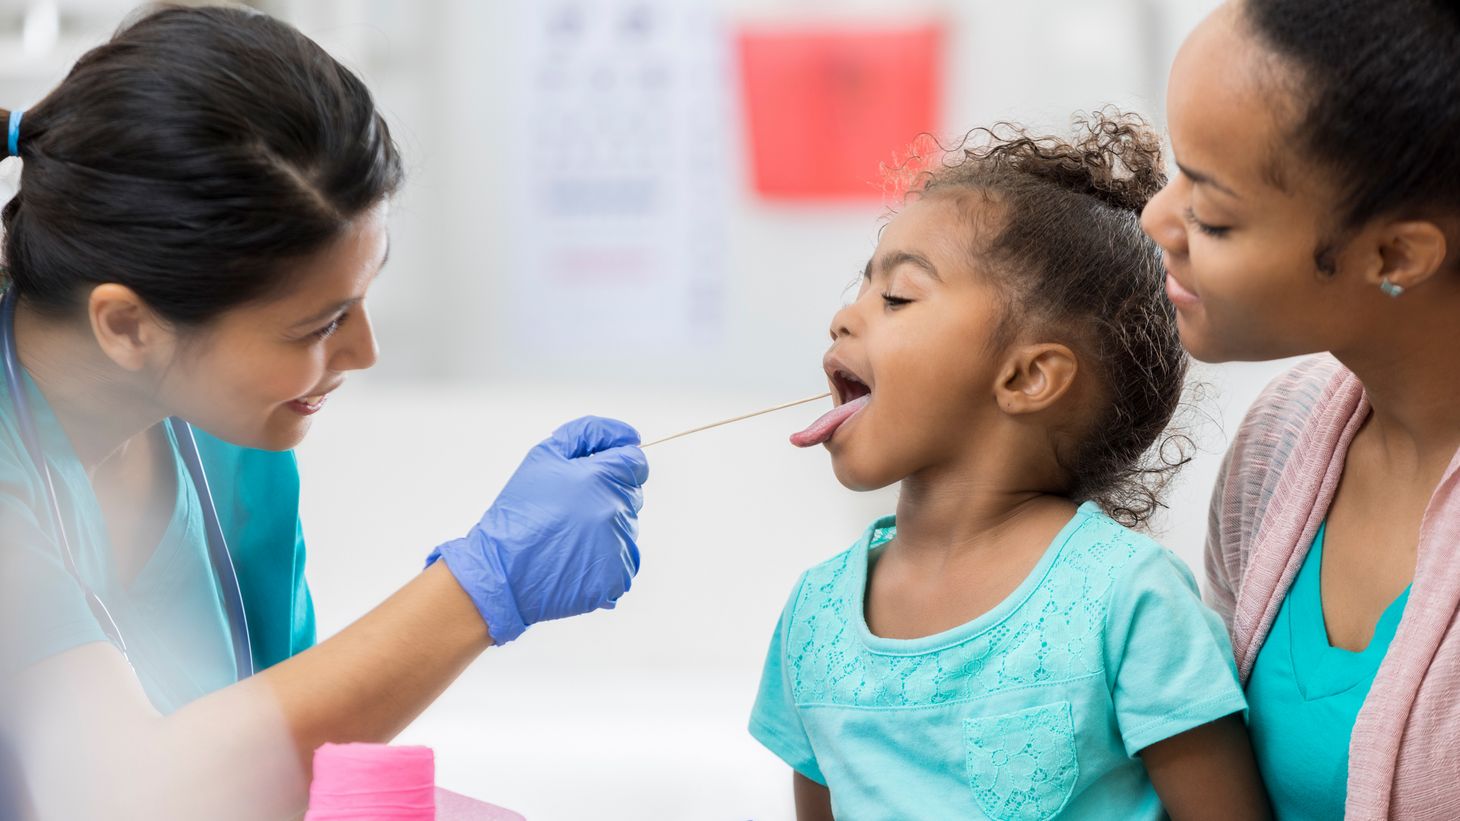 Nurse looking inside a child's mouth